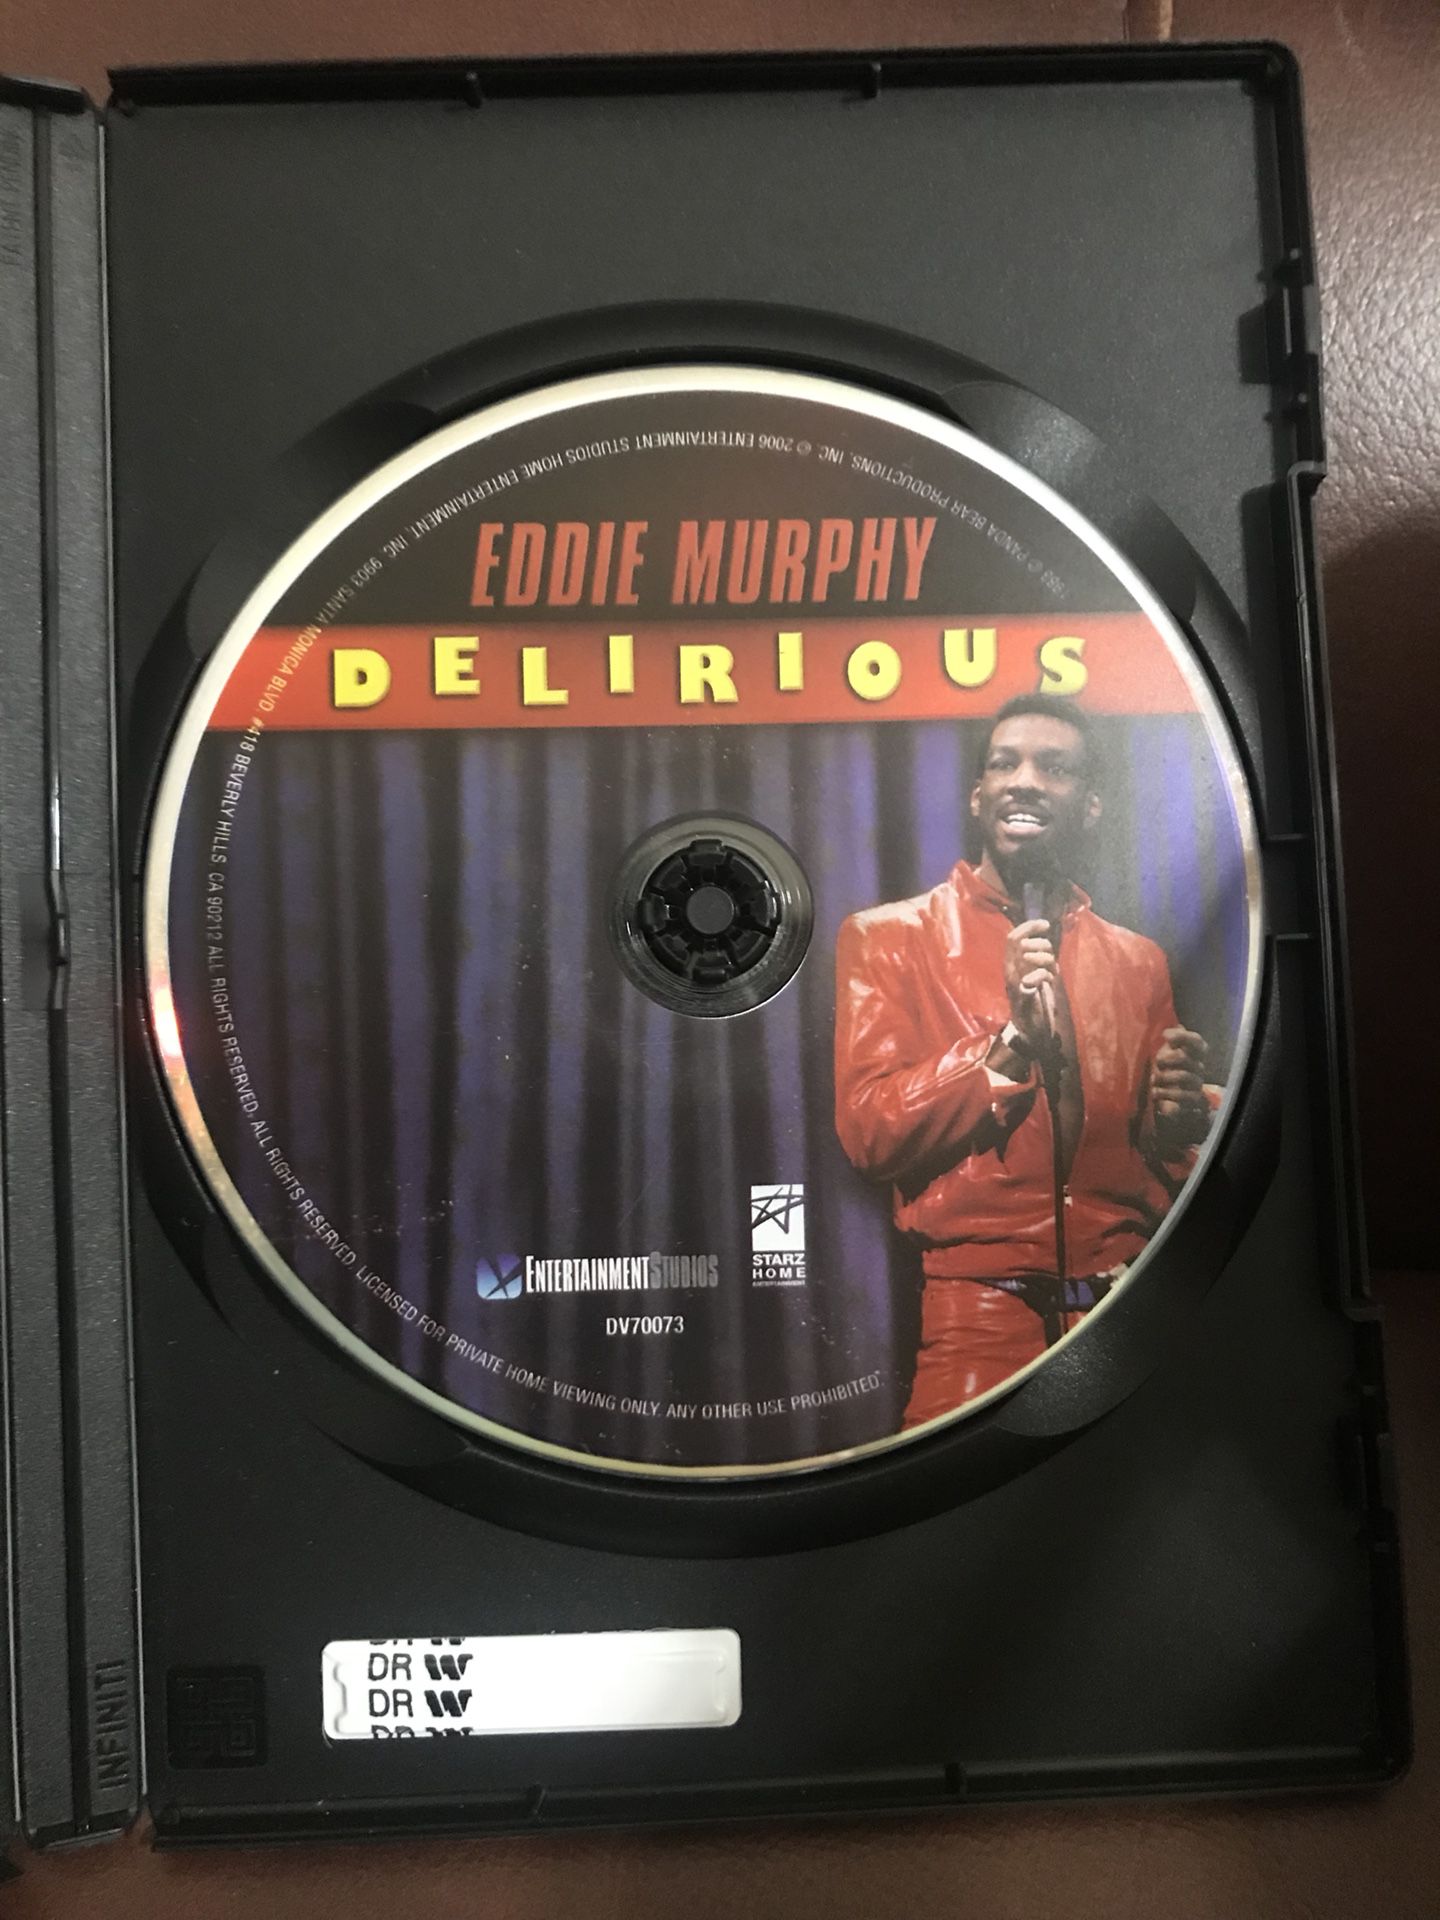 2006 Eddie Murphy Delirious stand up comedy dvd. Very good condition